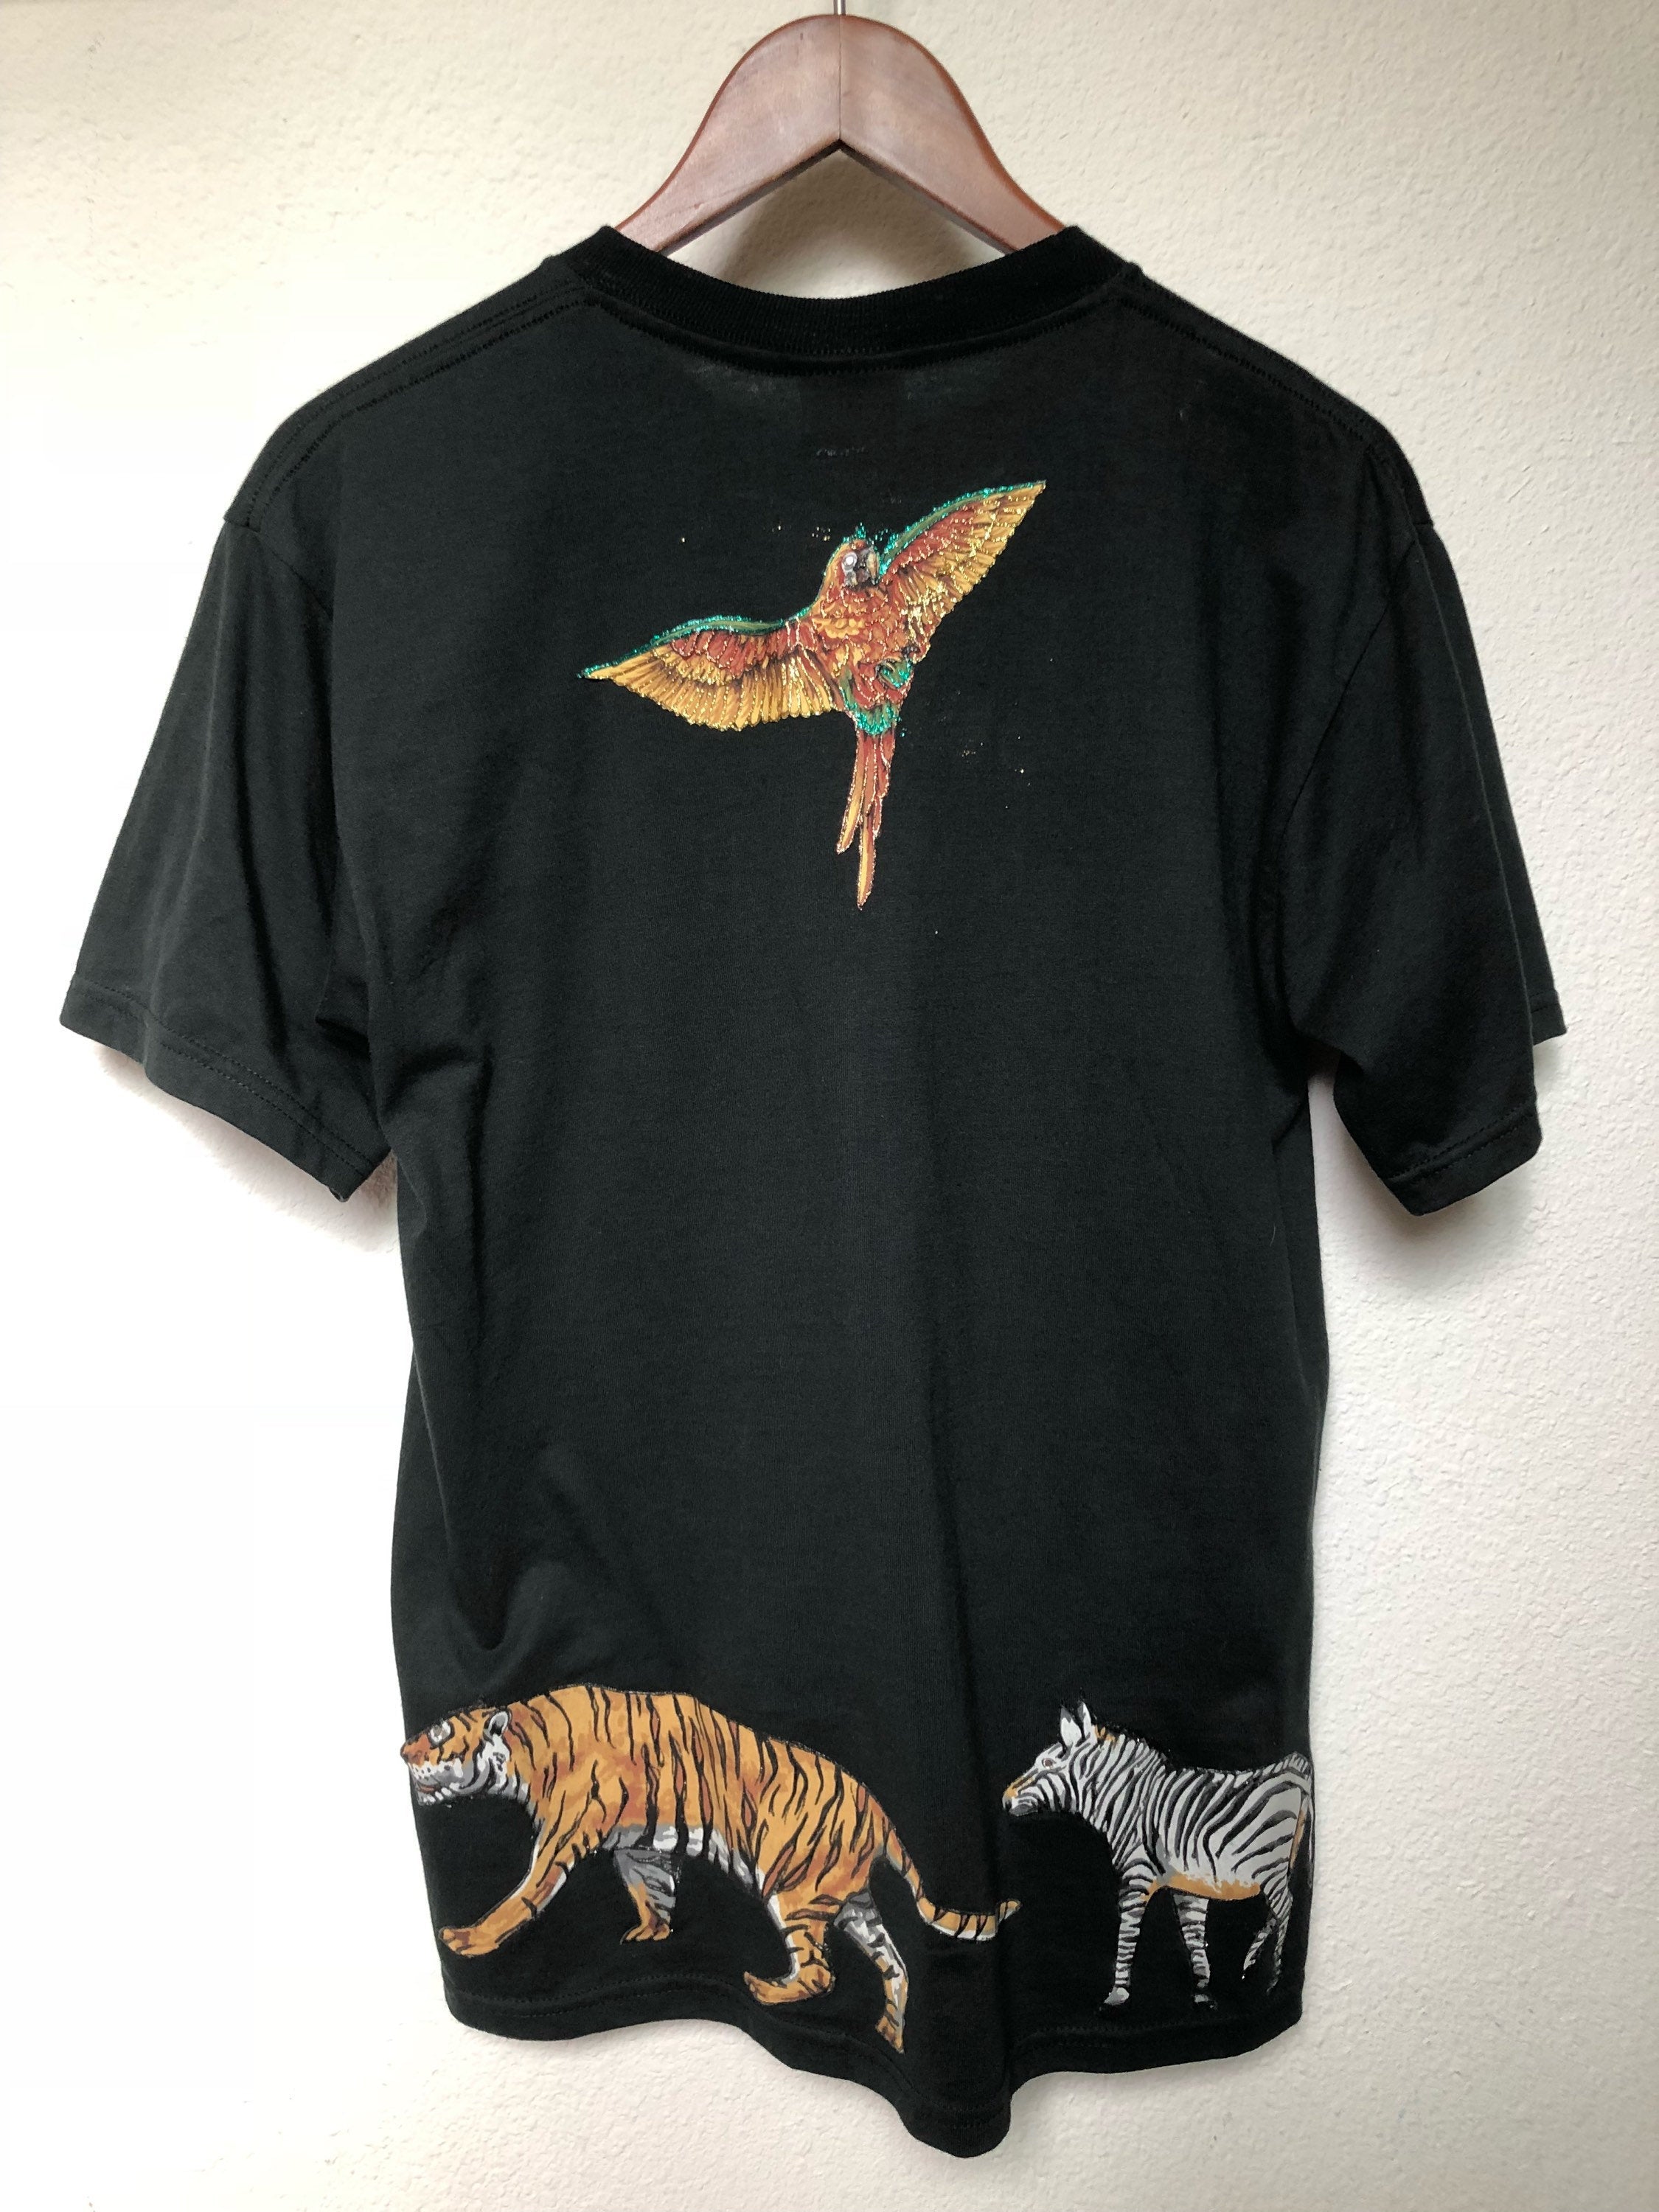 Vintage 90’s Black T-Shirt with Iron On Animals Details by Jerzees ...